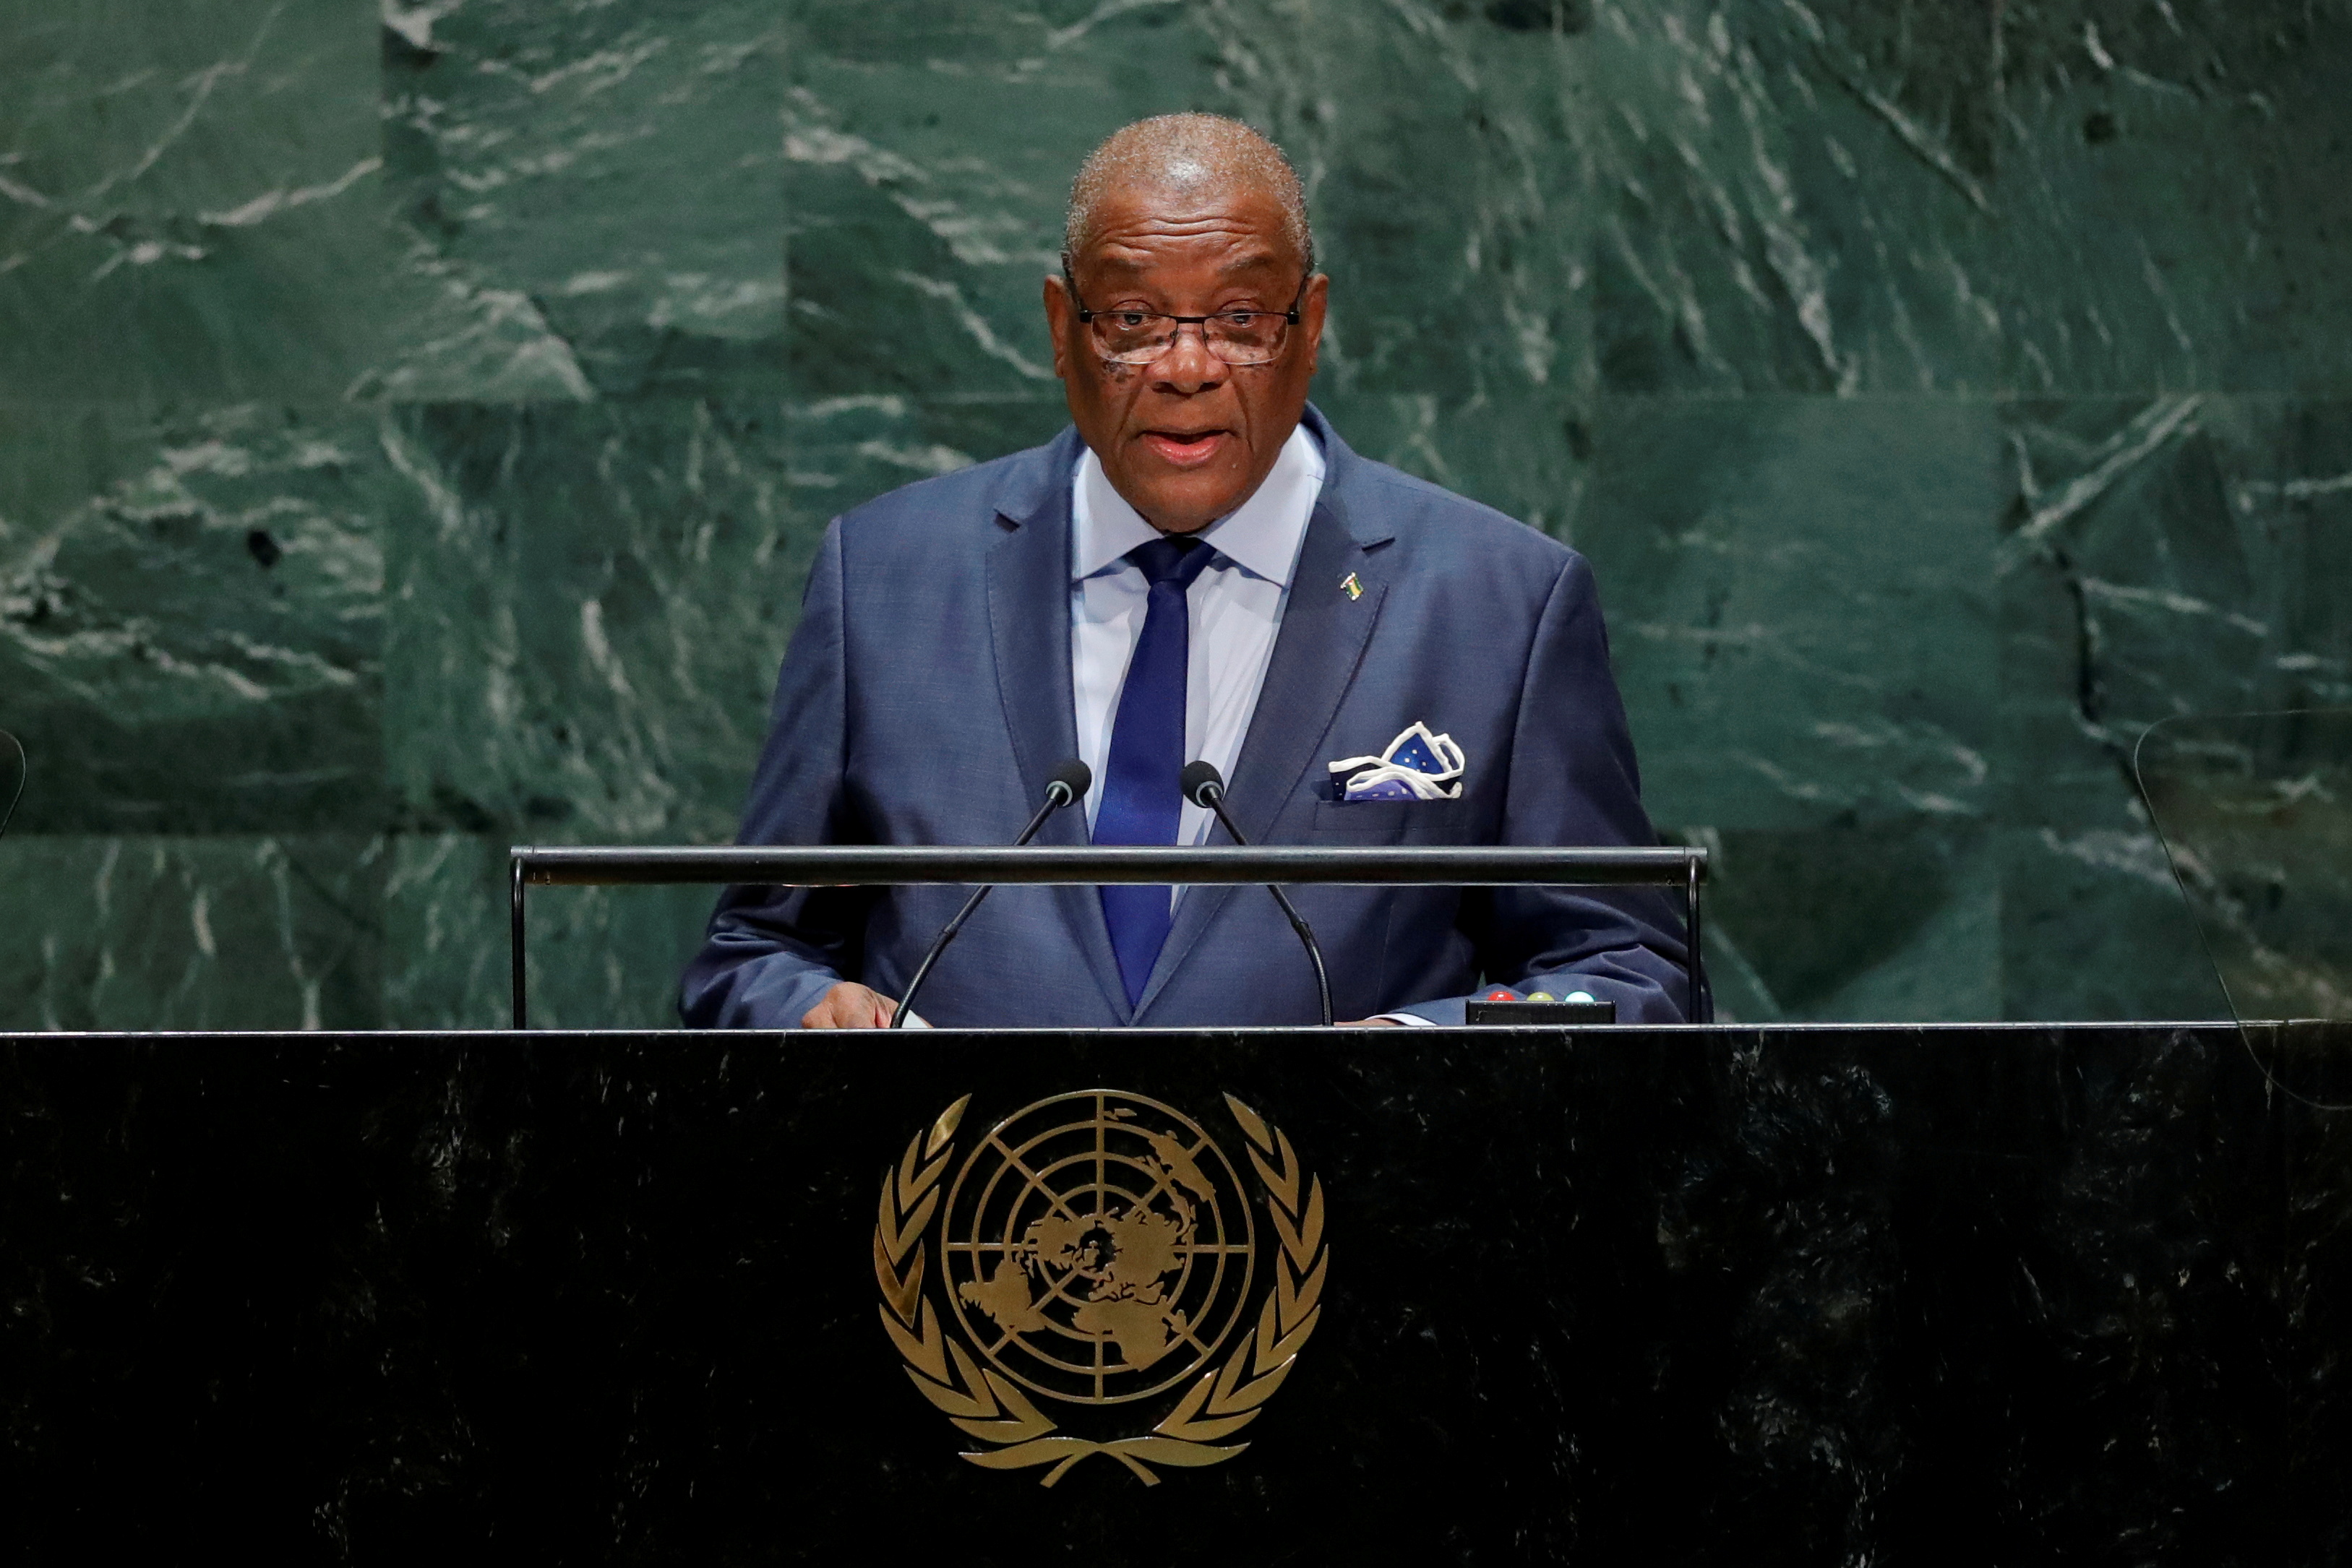 Evaristo Carvalho, President of Sao Tome and Principe addresses the 74th session of the United Nations General Assembly at U.N. headquarters in New York City, New York